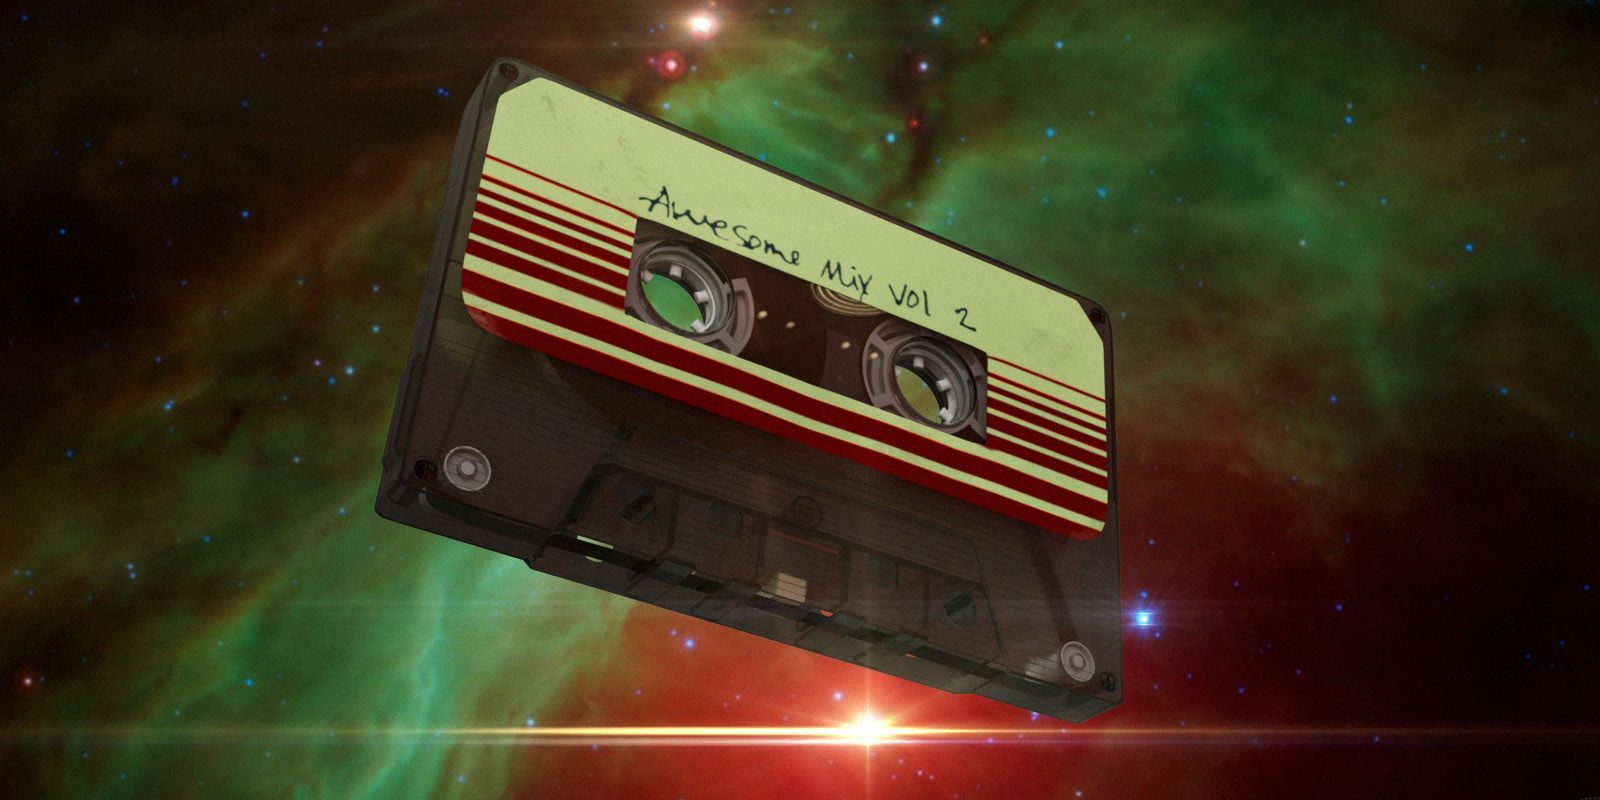 Guardians of the Galaxy Awesome Mix Vol 2 Fan Art